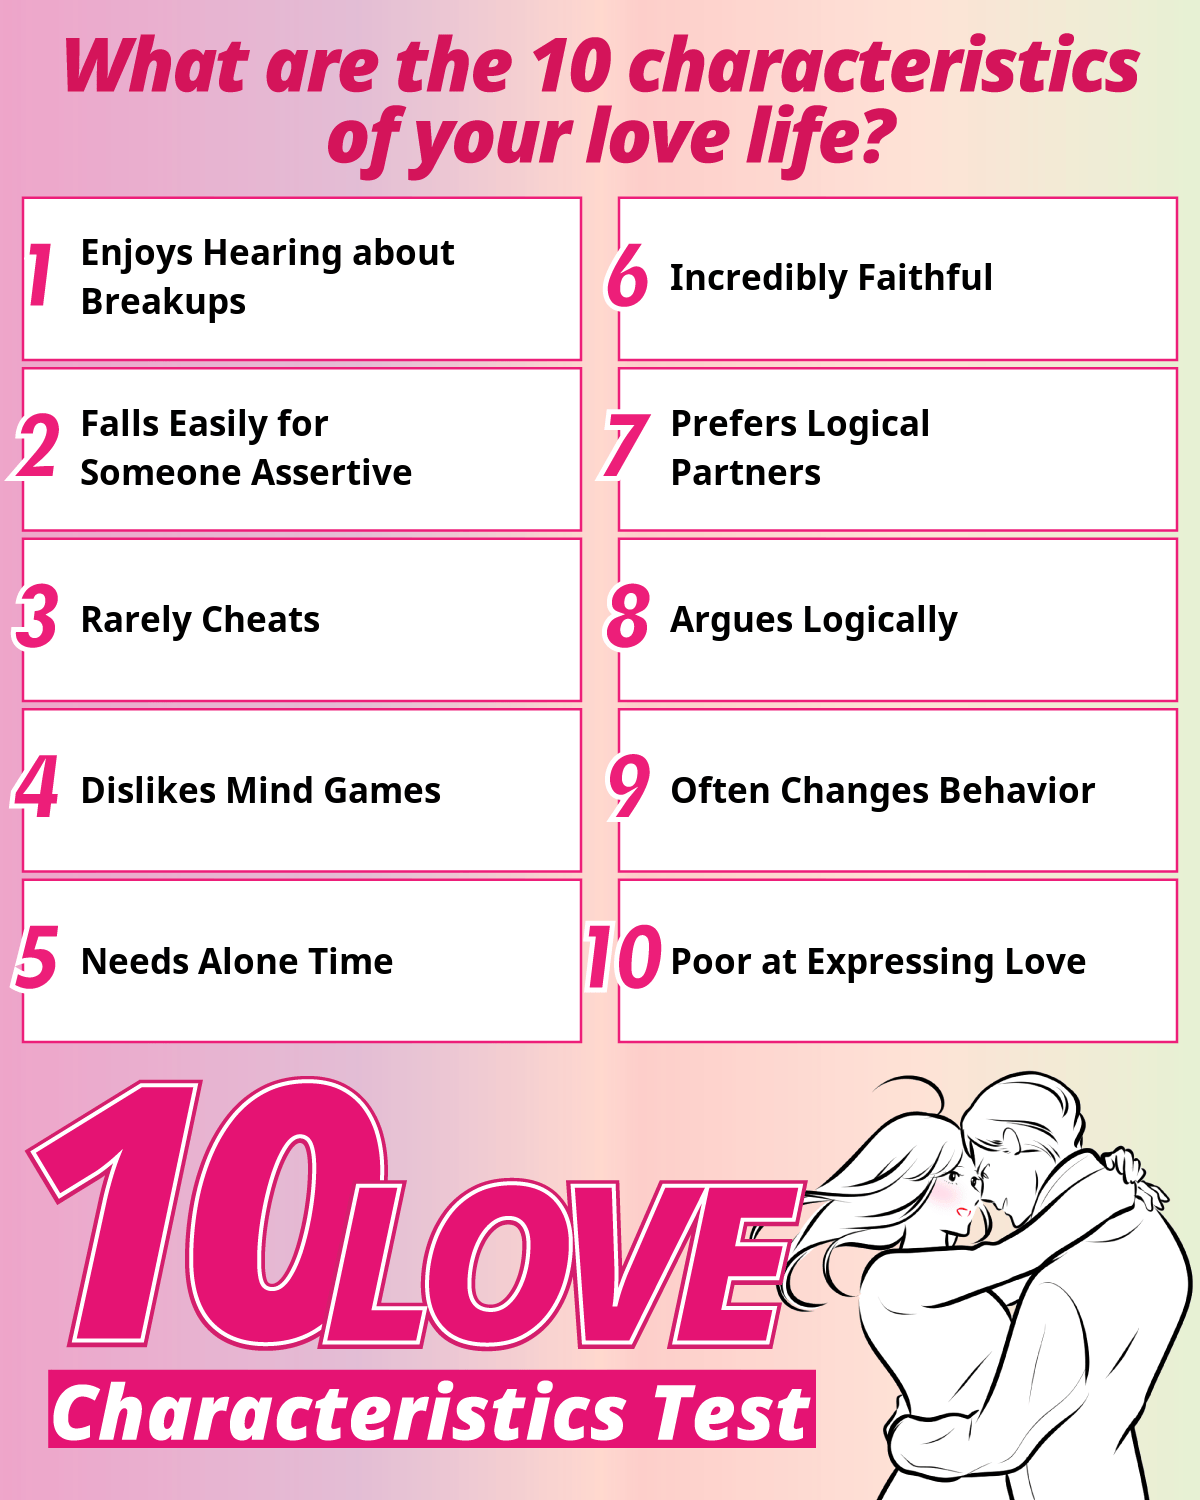 10 Love Characteristics Test | What are the 10 characteristics of your love life?